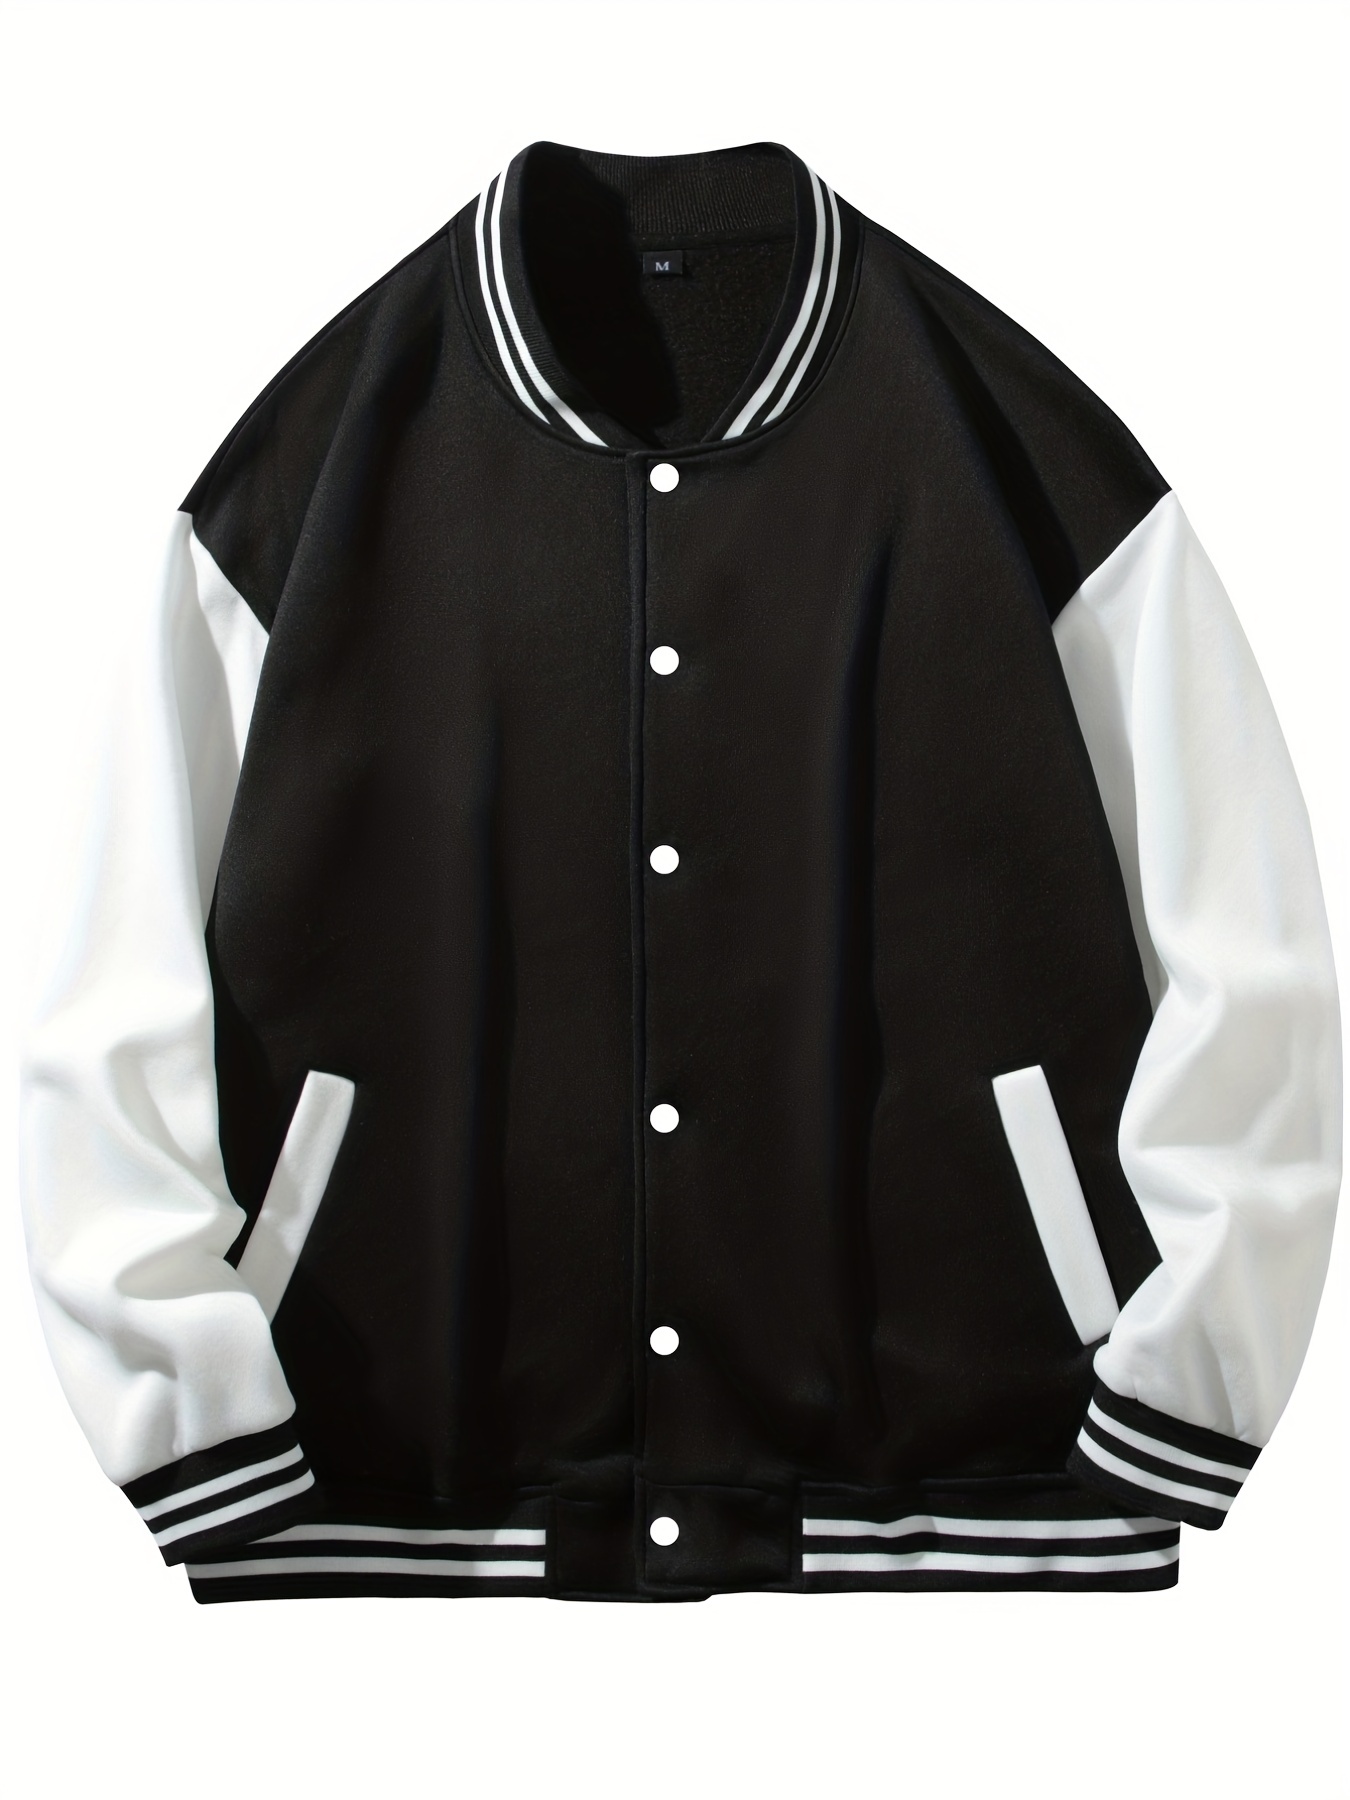 classic design varsity jacket mens casual color block button up jacket for spring fall school baseball details 20